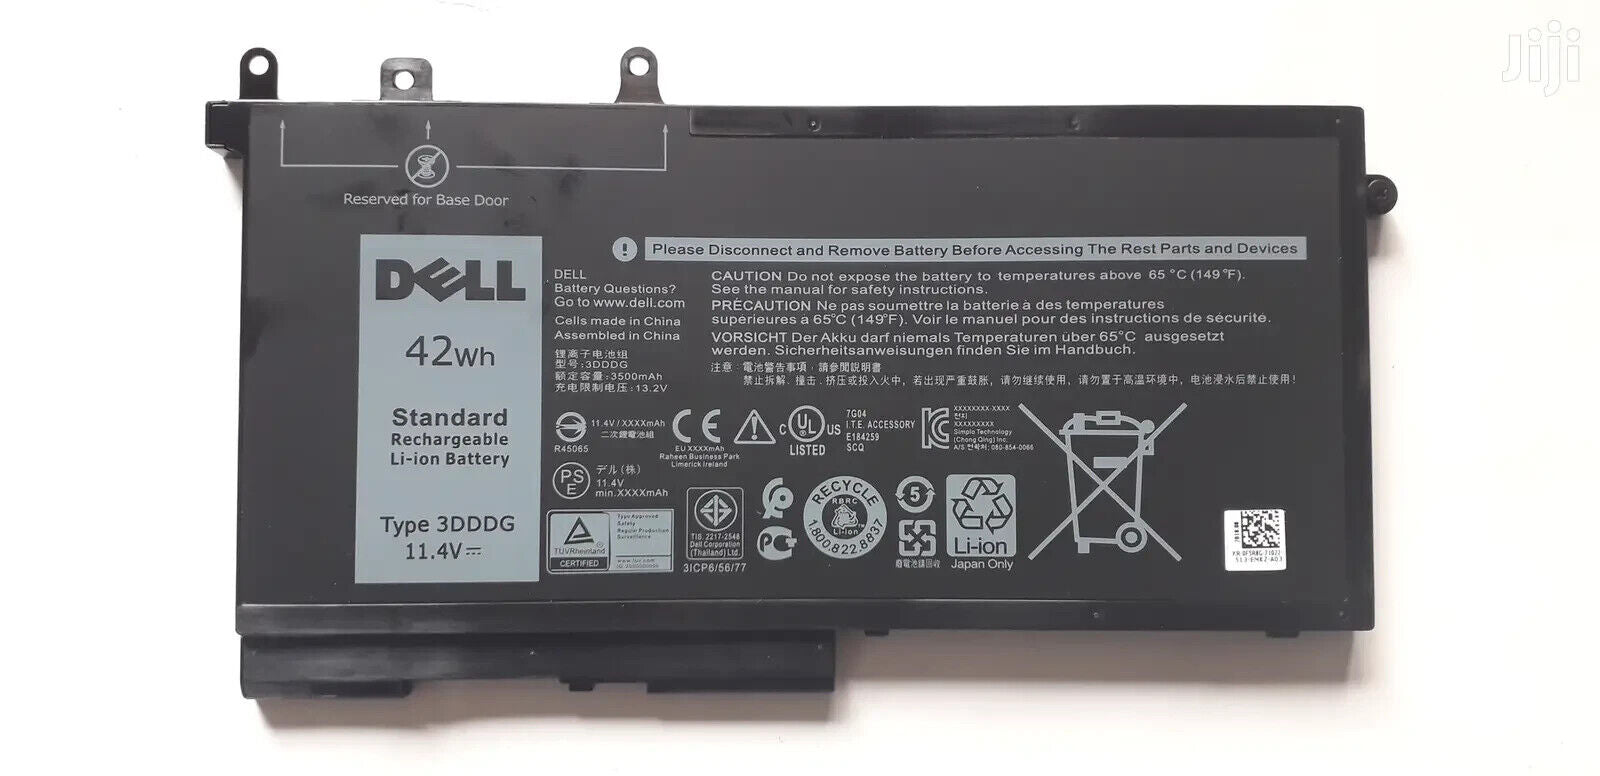 Dell 3DDDG 3-Cells 42Wh Laptop Battery for Latitude 5280 5288 Precision 3530 3520